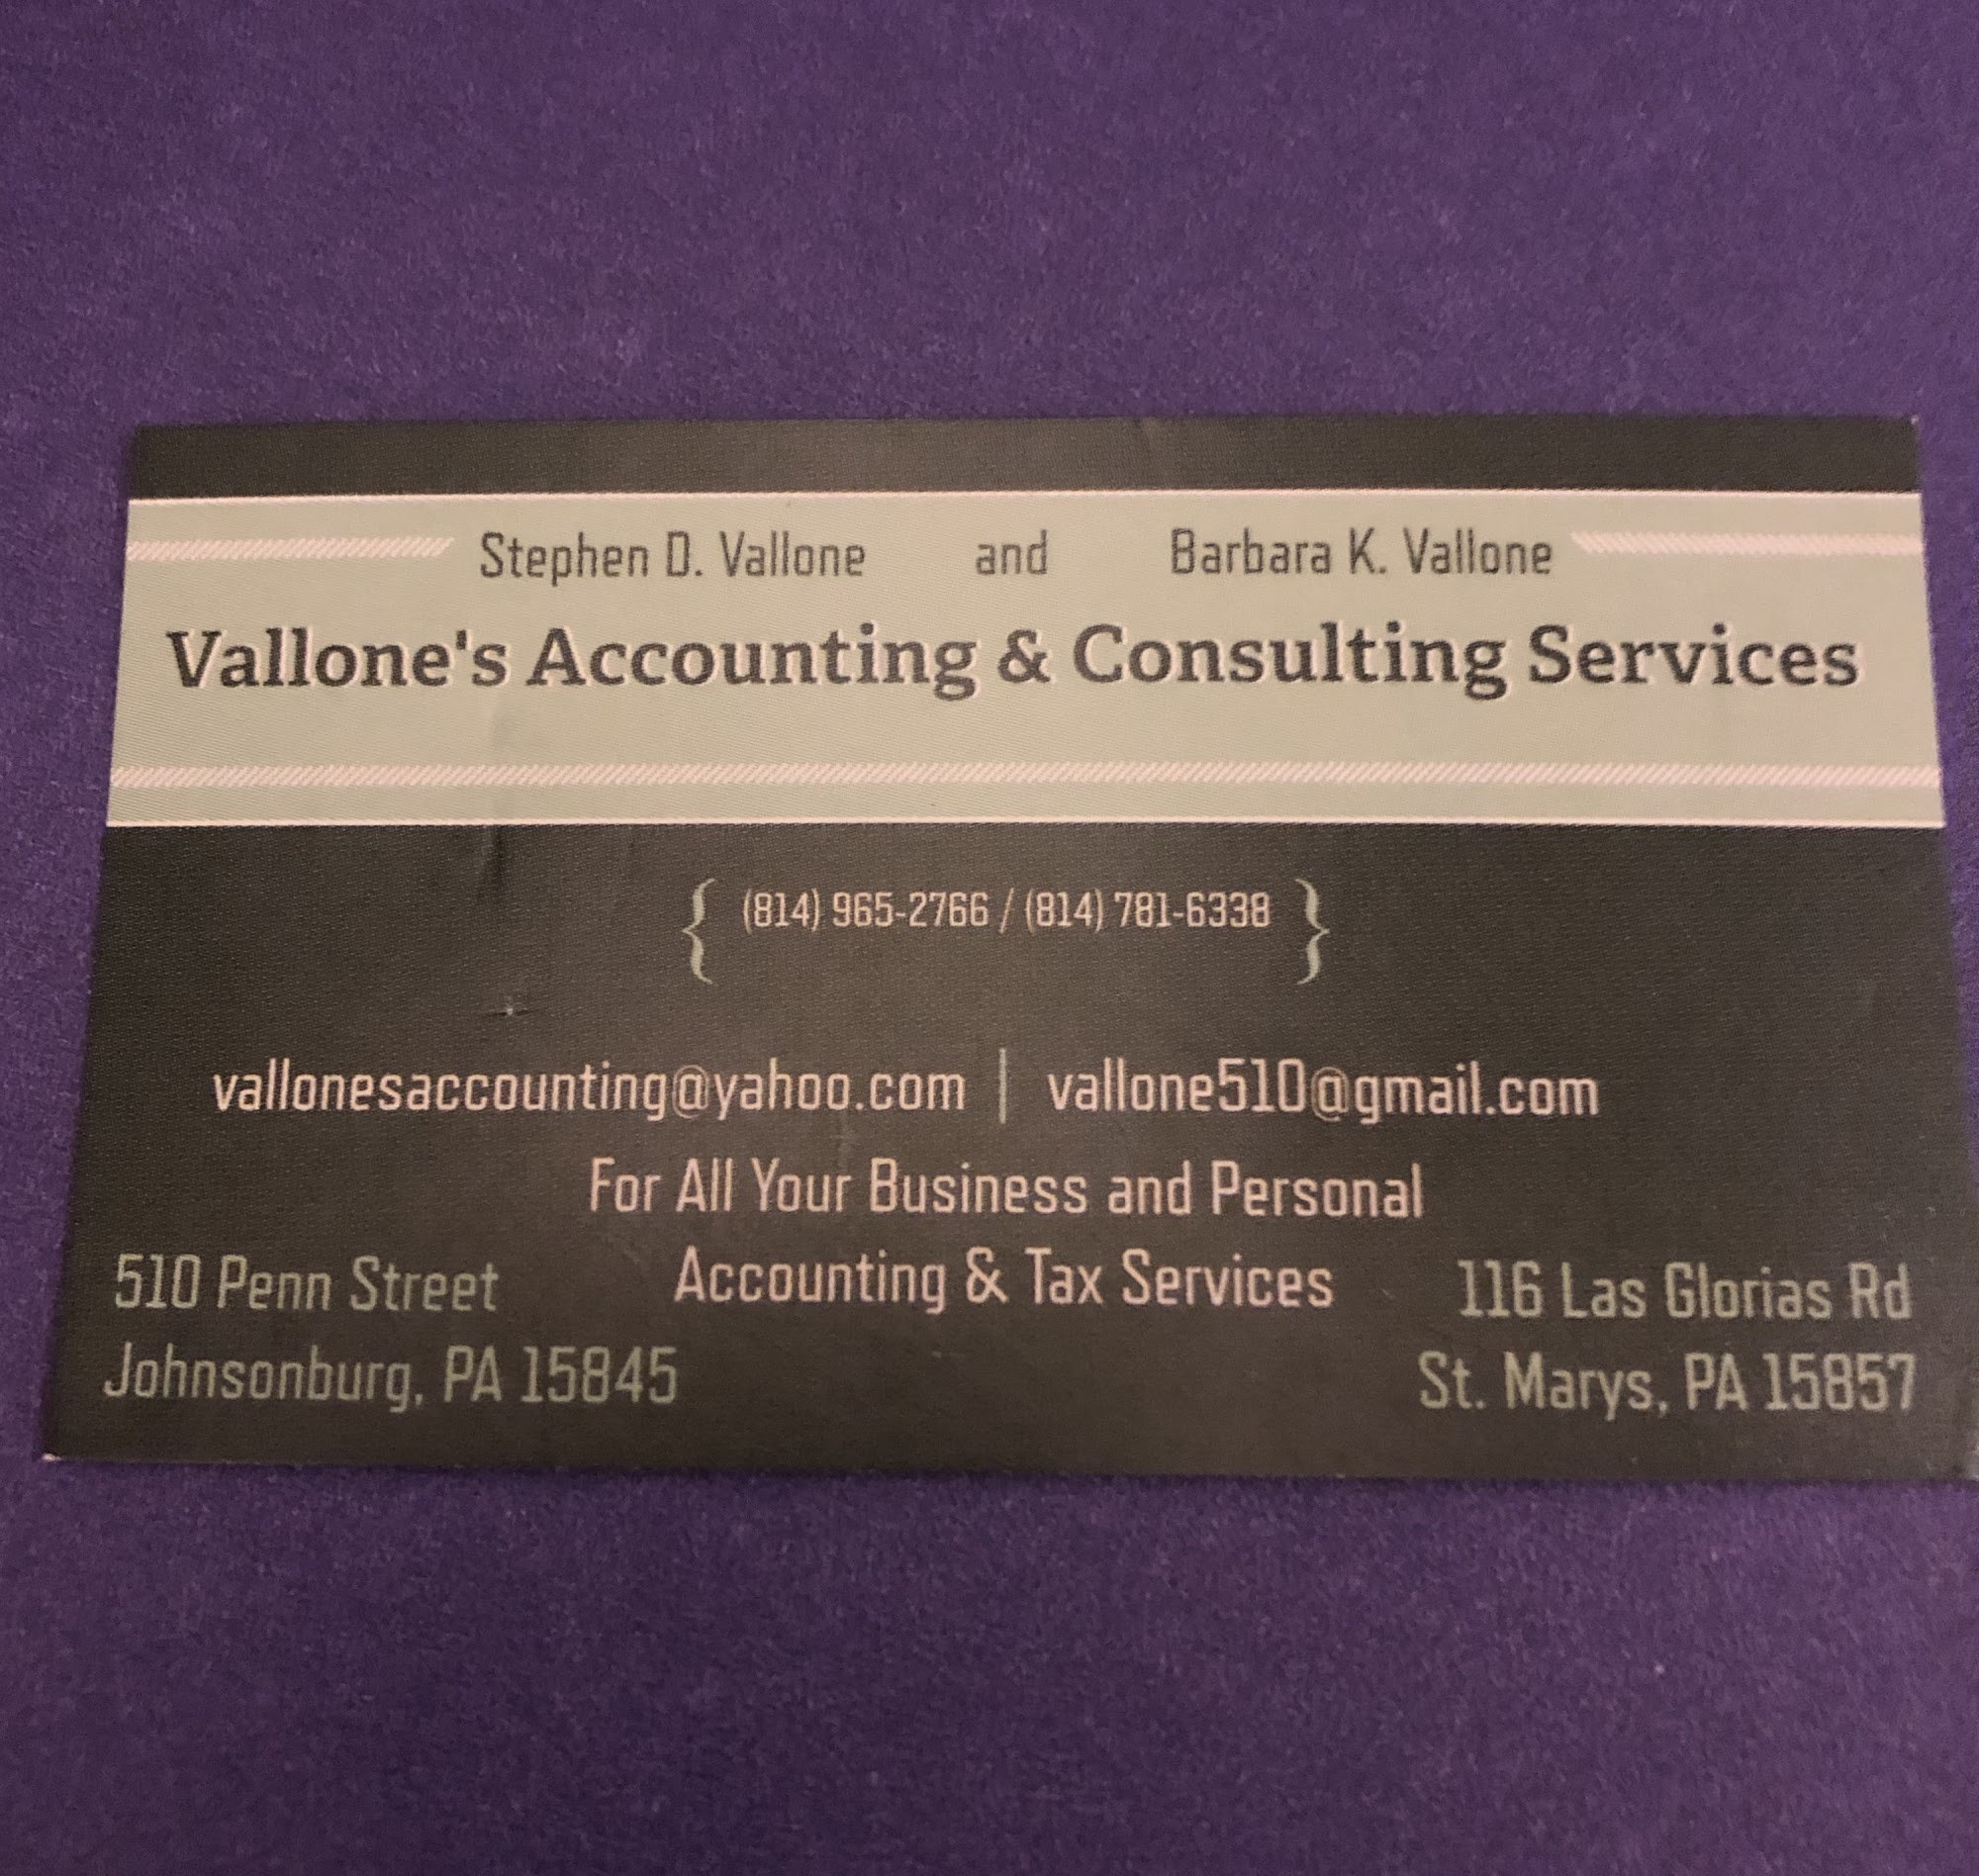 Vallone's Accounting & Consulting Services